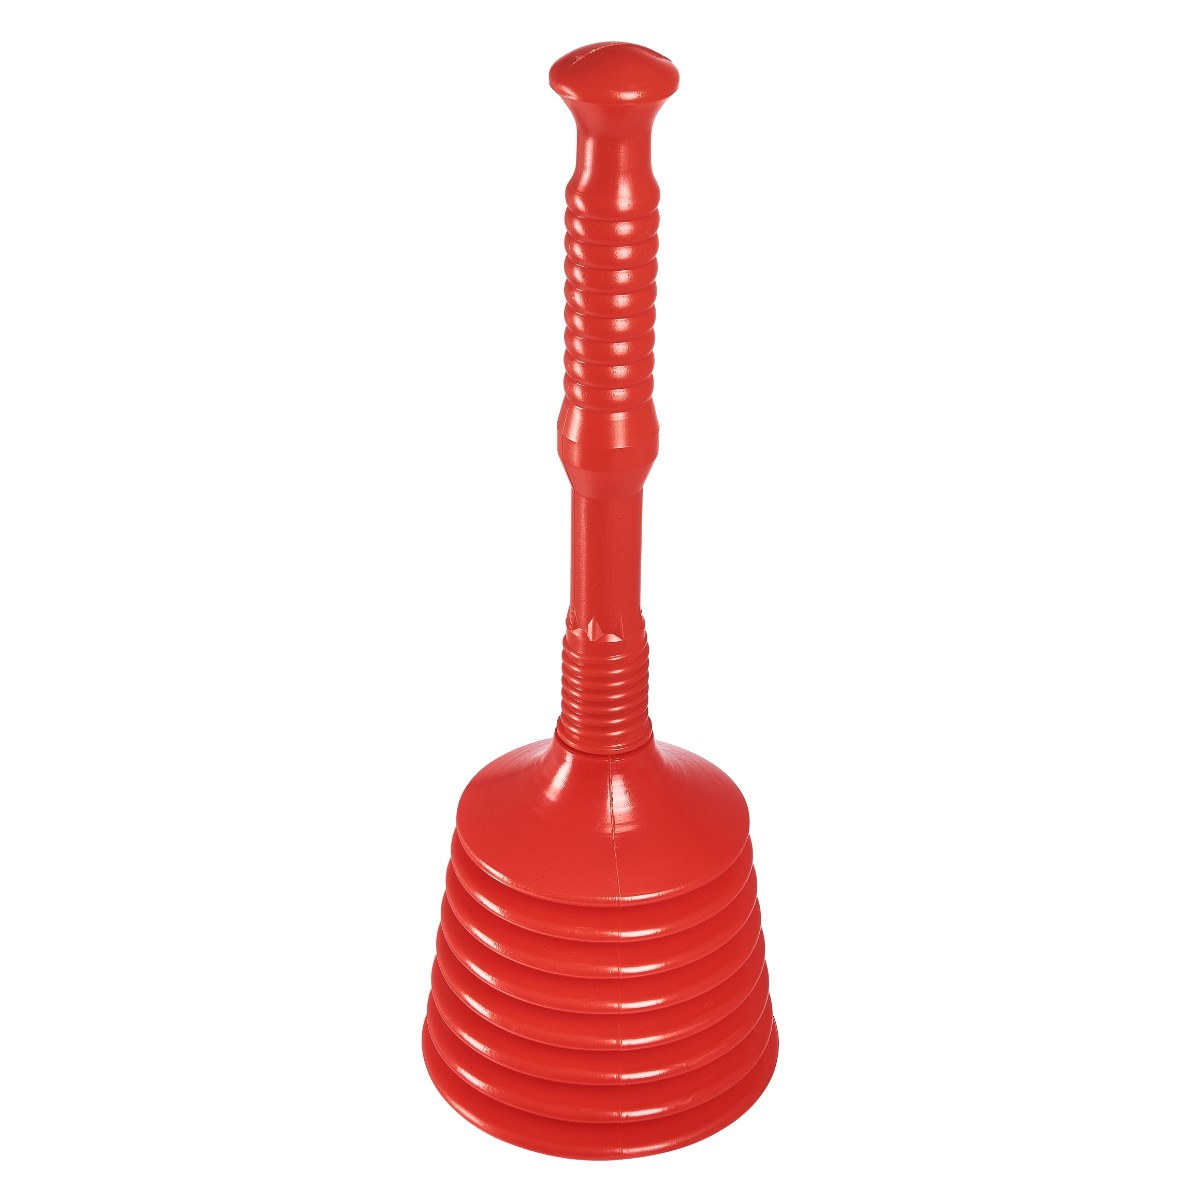 Brand New High quality Heavy Duty Plunger Amtech S1490 Large size for Home 